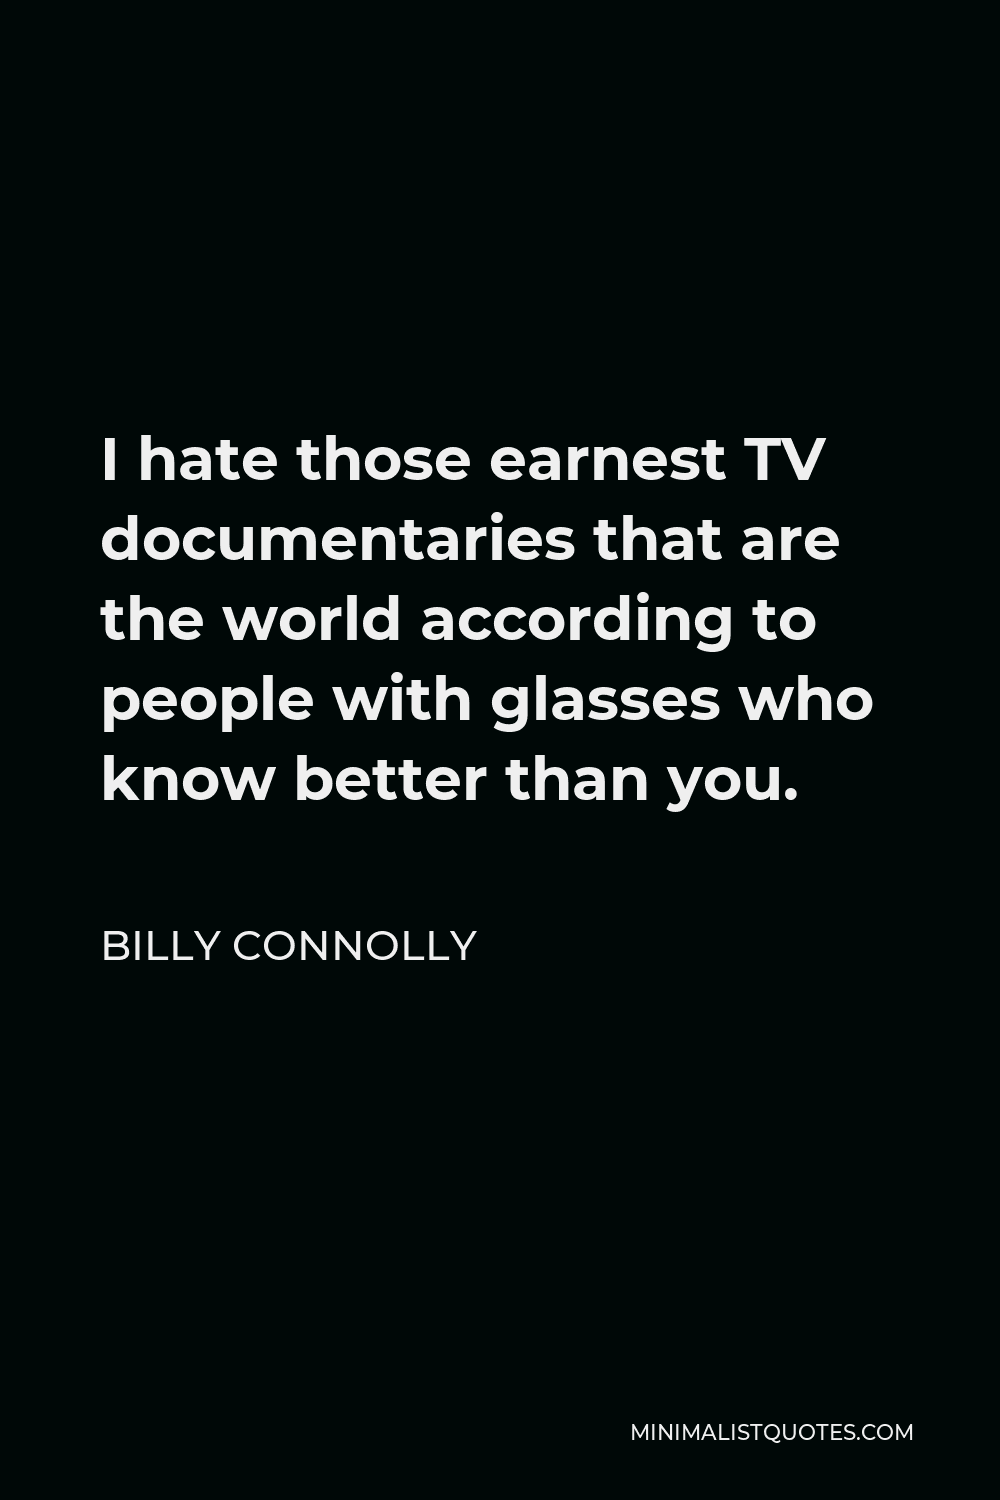 Billy Connolly Quote - I hate those earnest TV documentaries that are the world according to people with glasses who know better than you.